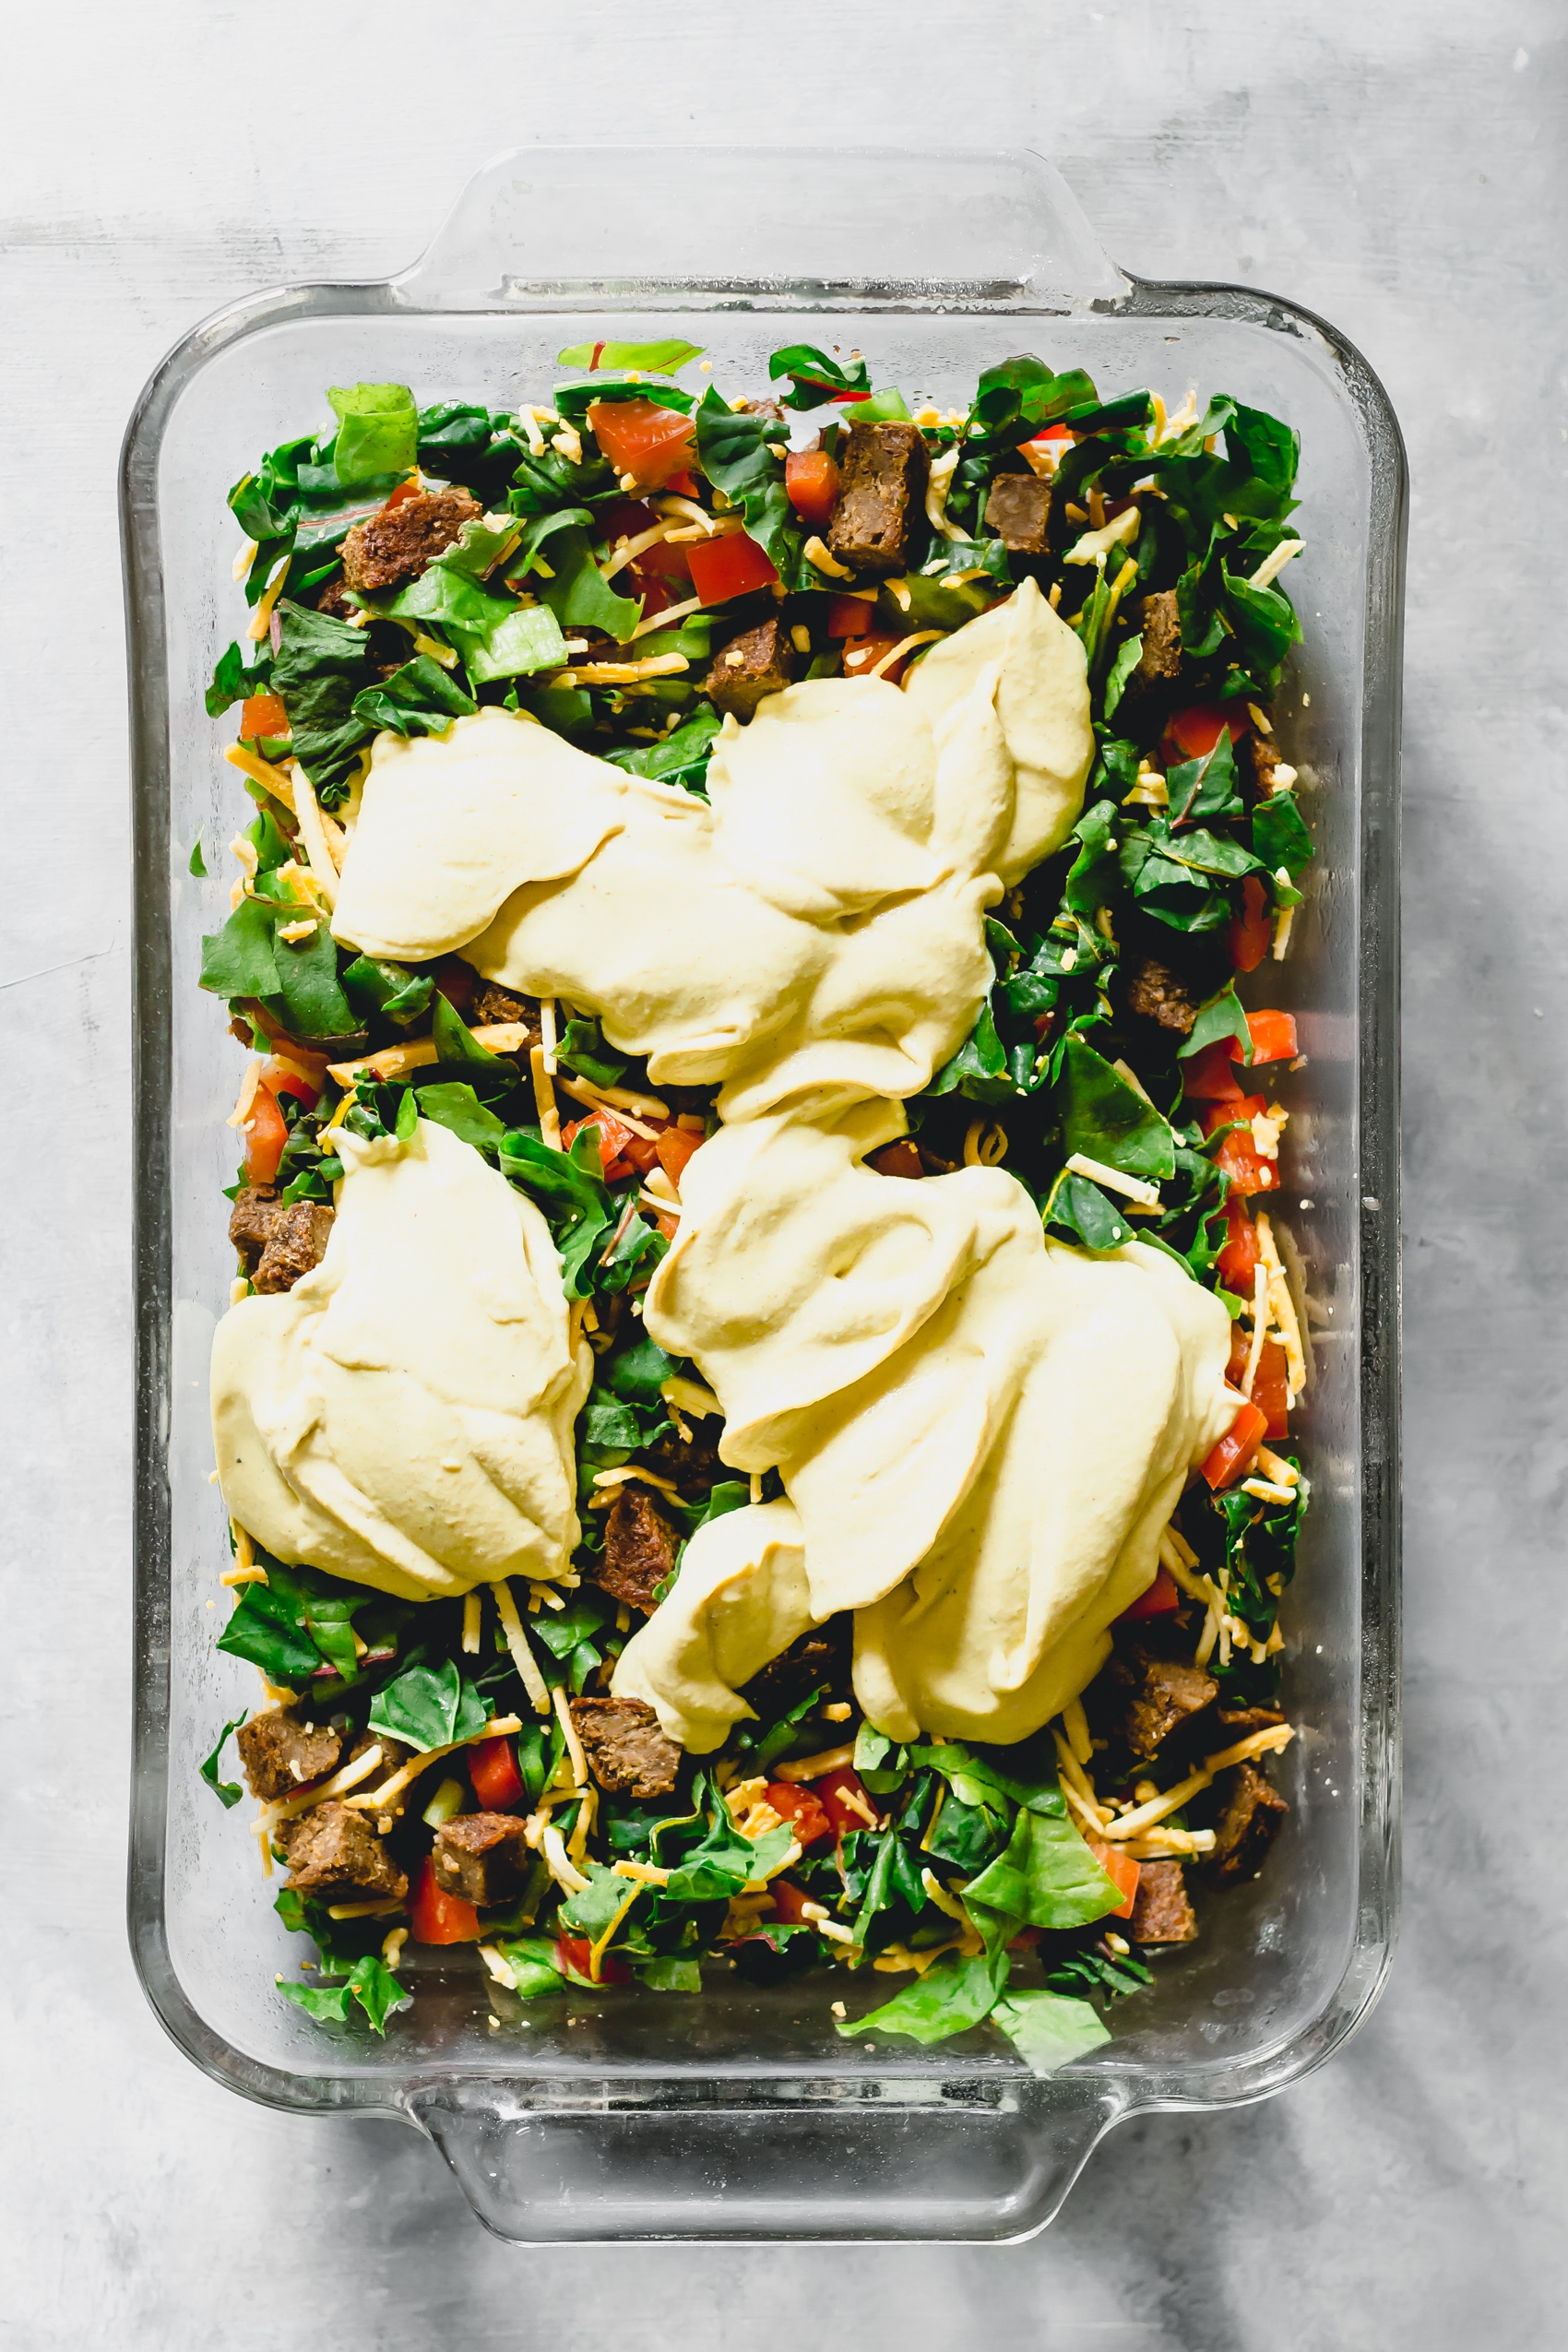 a casserole dish filled with vegetables, greens, vegan cheese and a vegan egg mixture